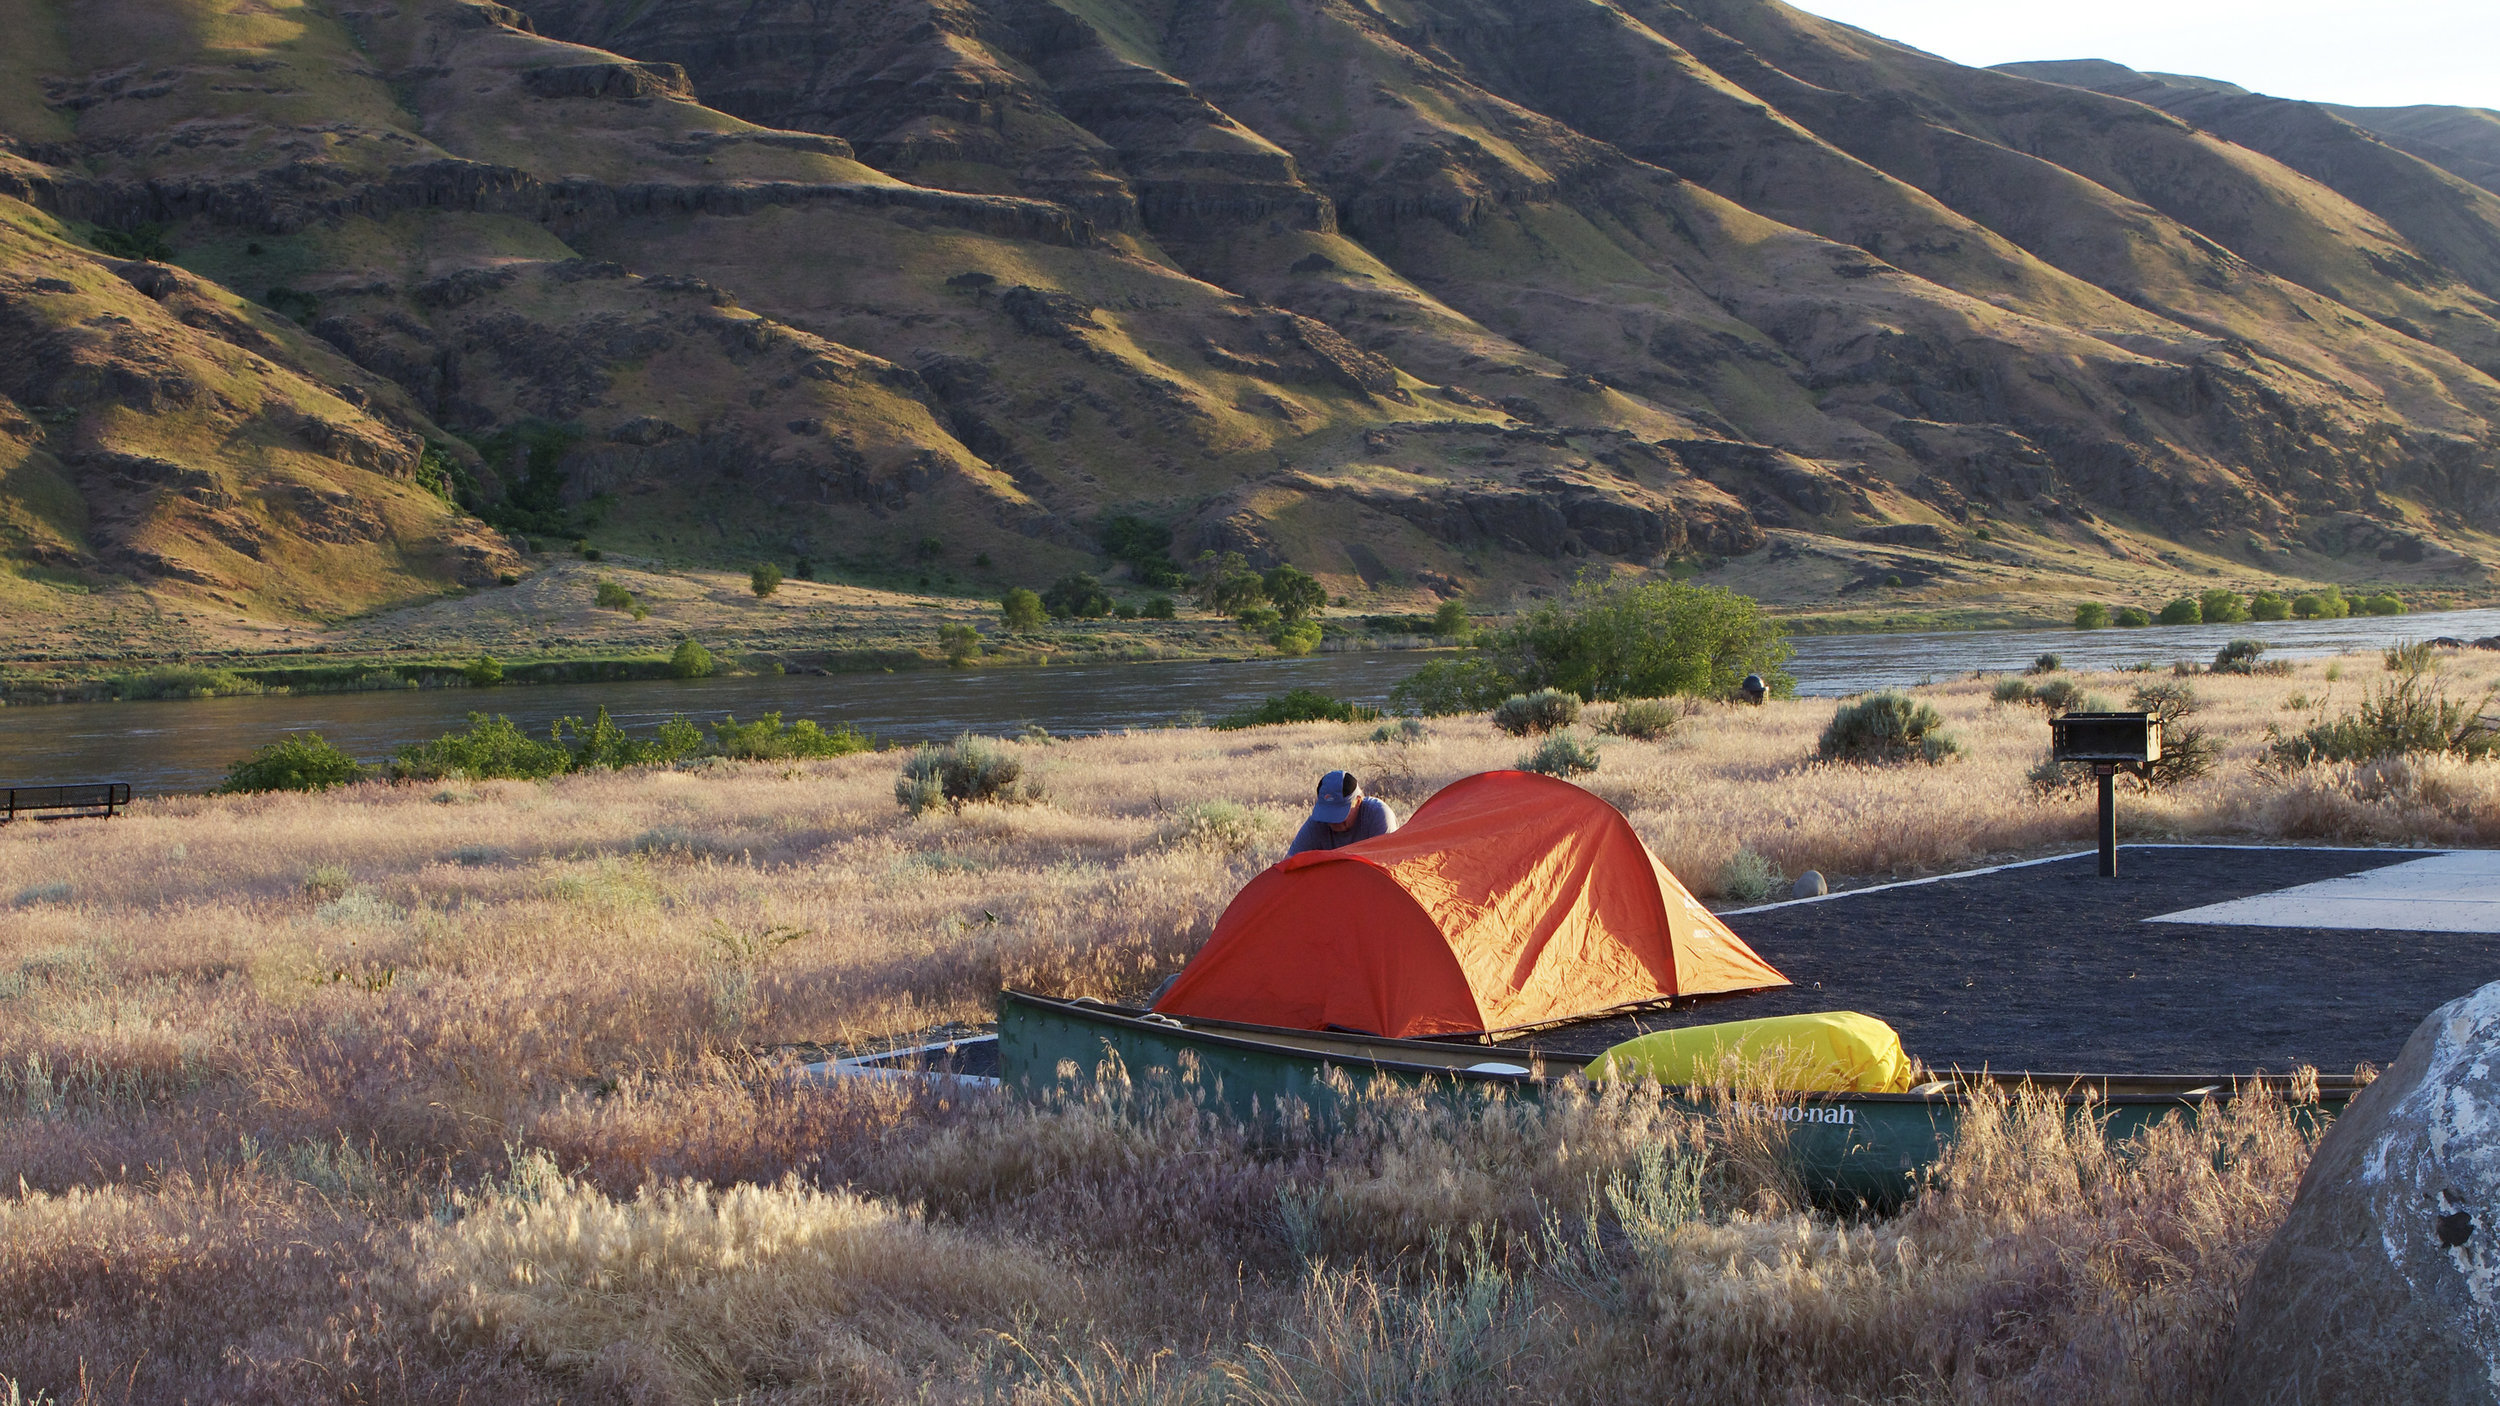  A campsite near the Columbia River in the Hanford Reach National Monument. Photo by Michael Deckert. 